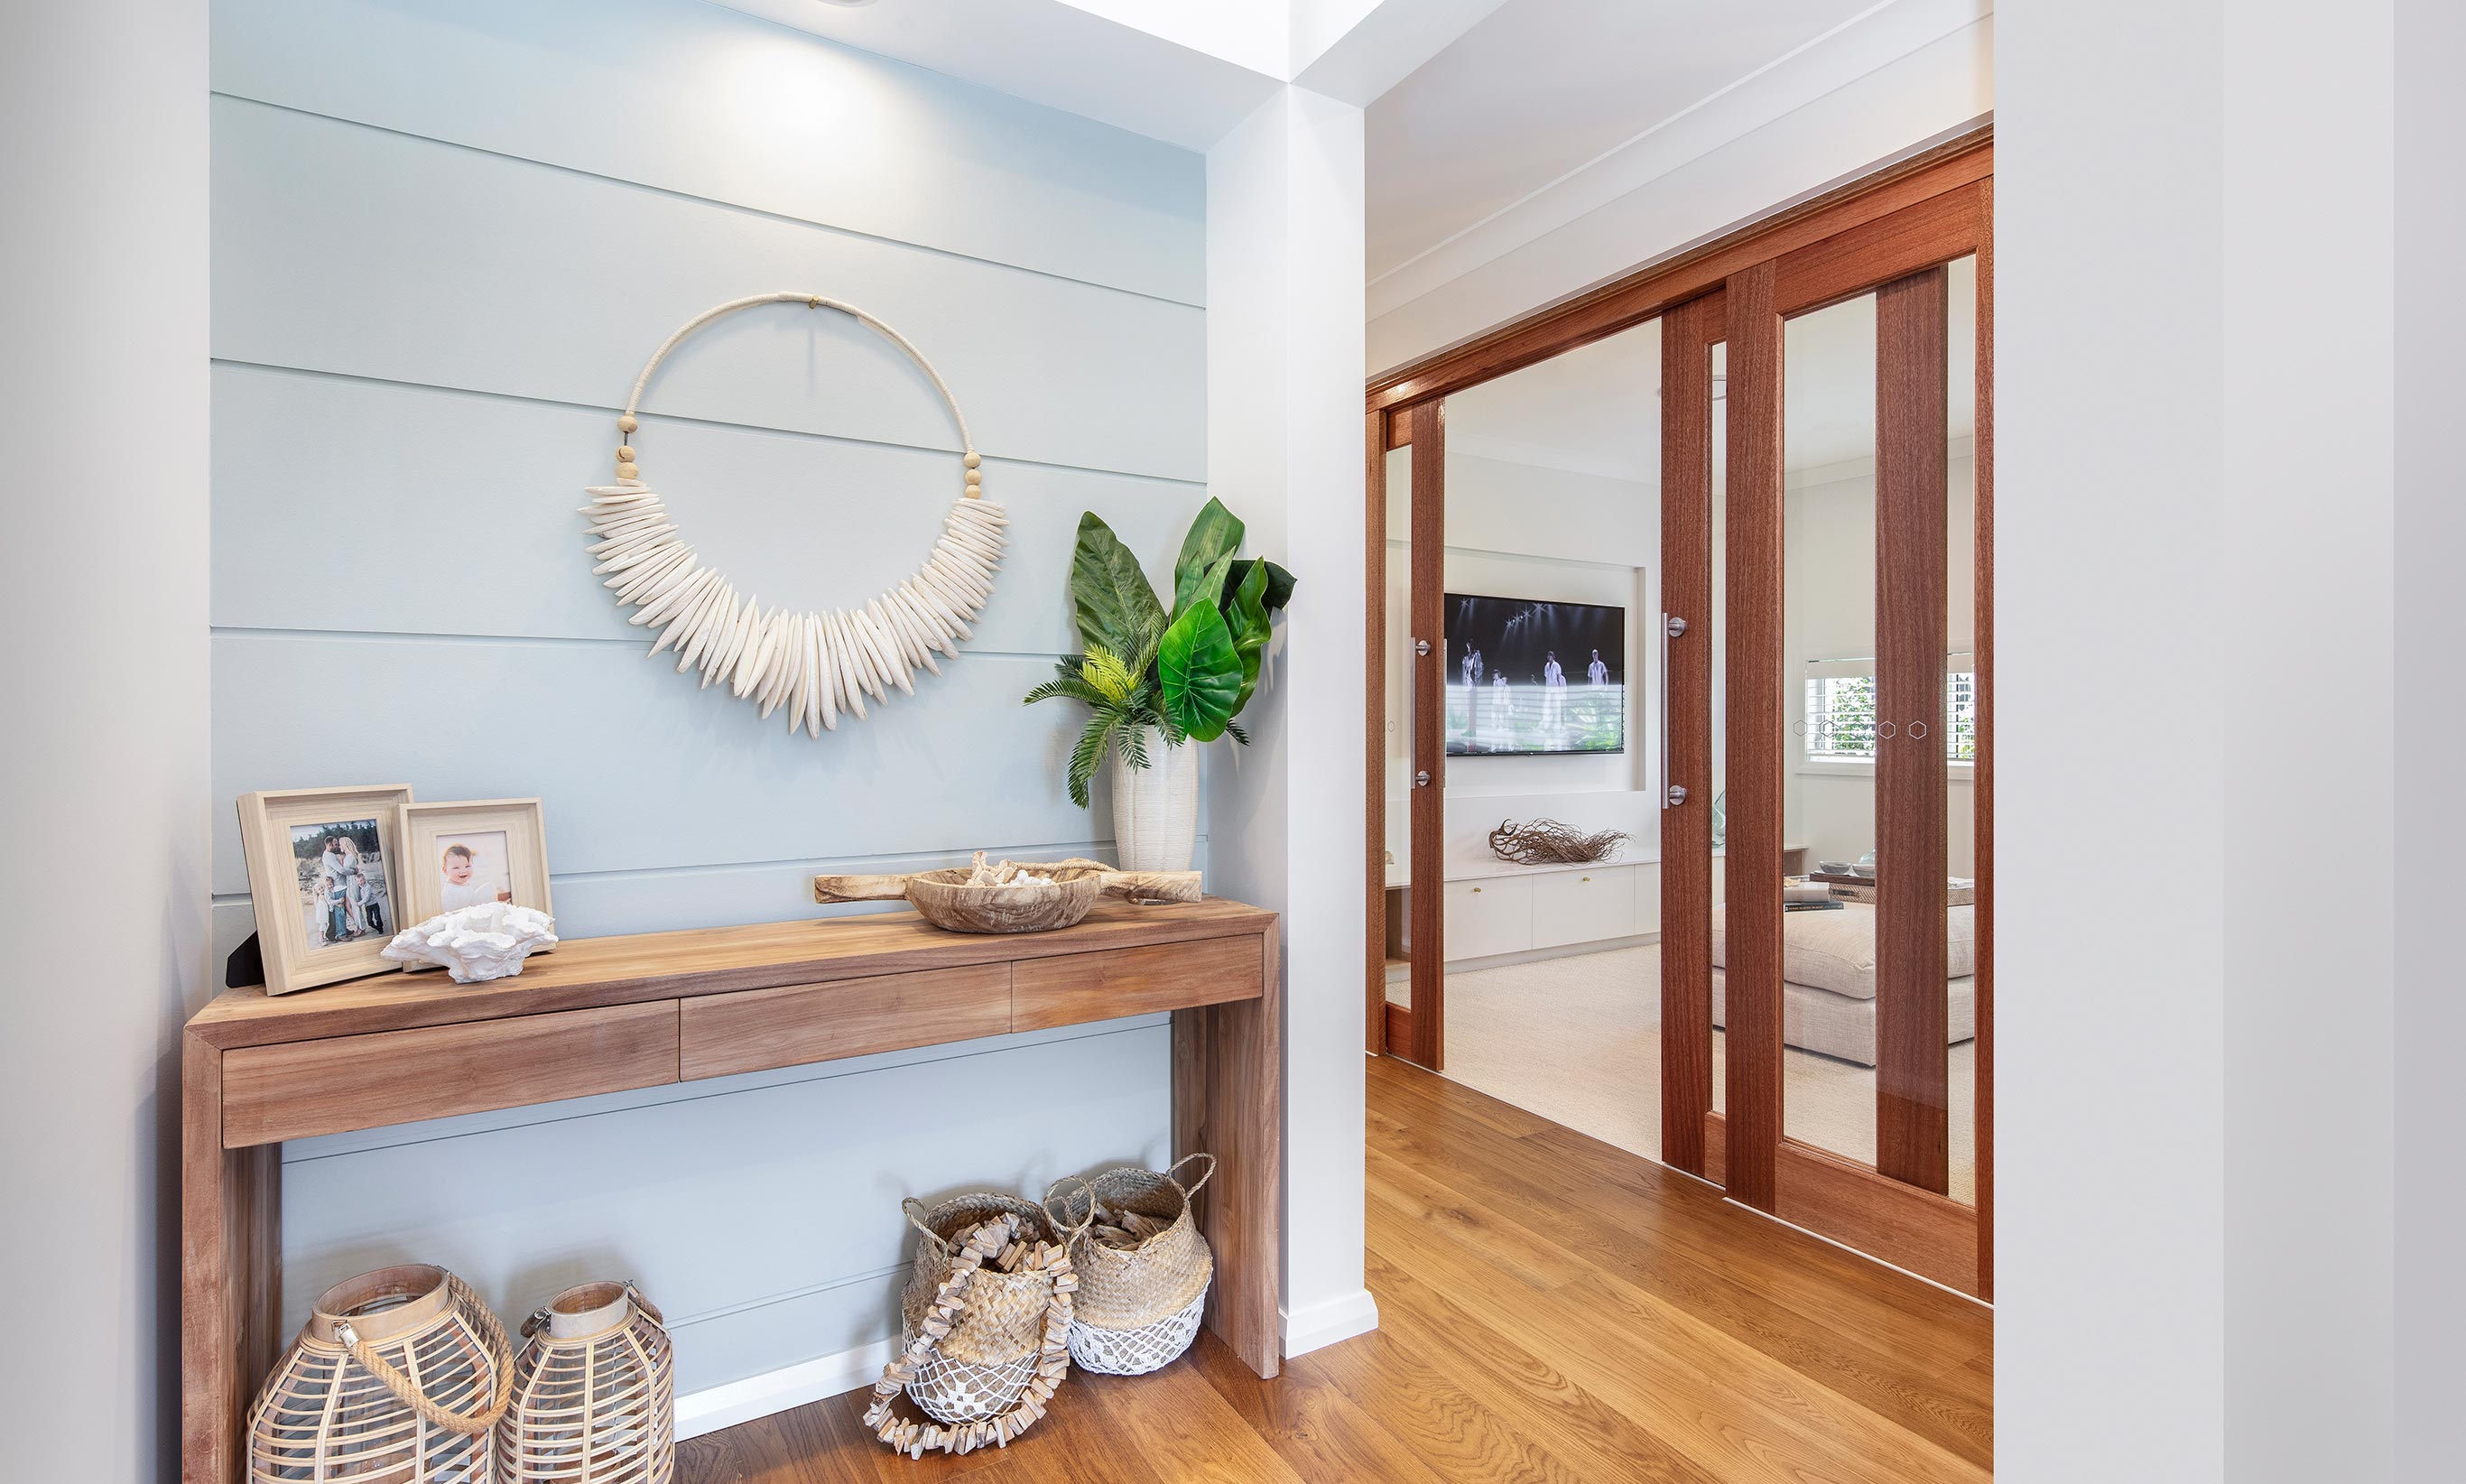 The Coolum at HomeWorld Warnervale features a soft coastal blue - seen in feature walls, cabinetry and furnishings throughout this stunning coastal styled home.